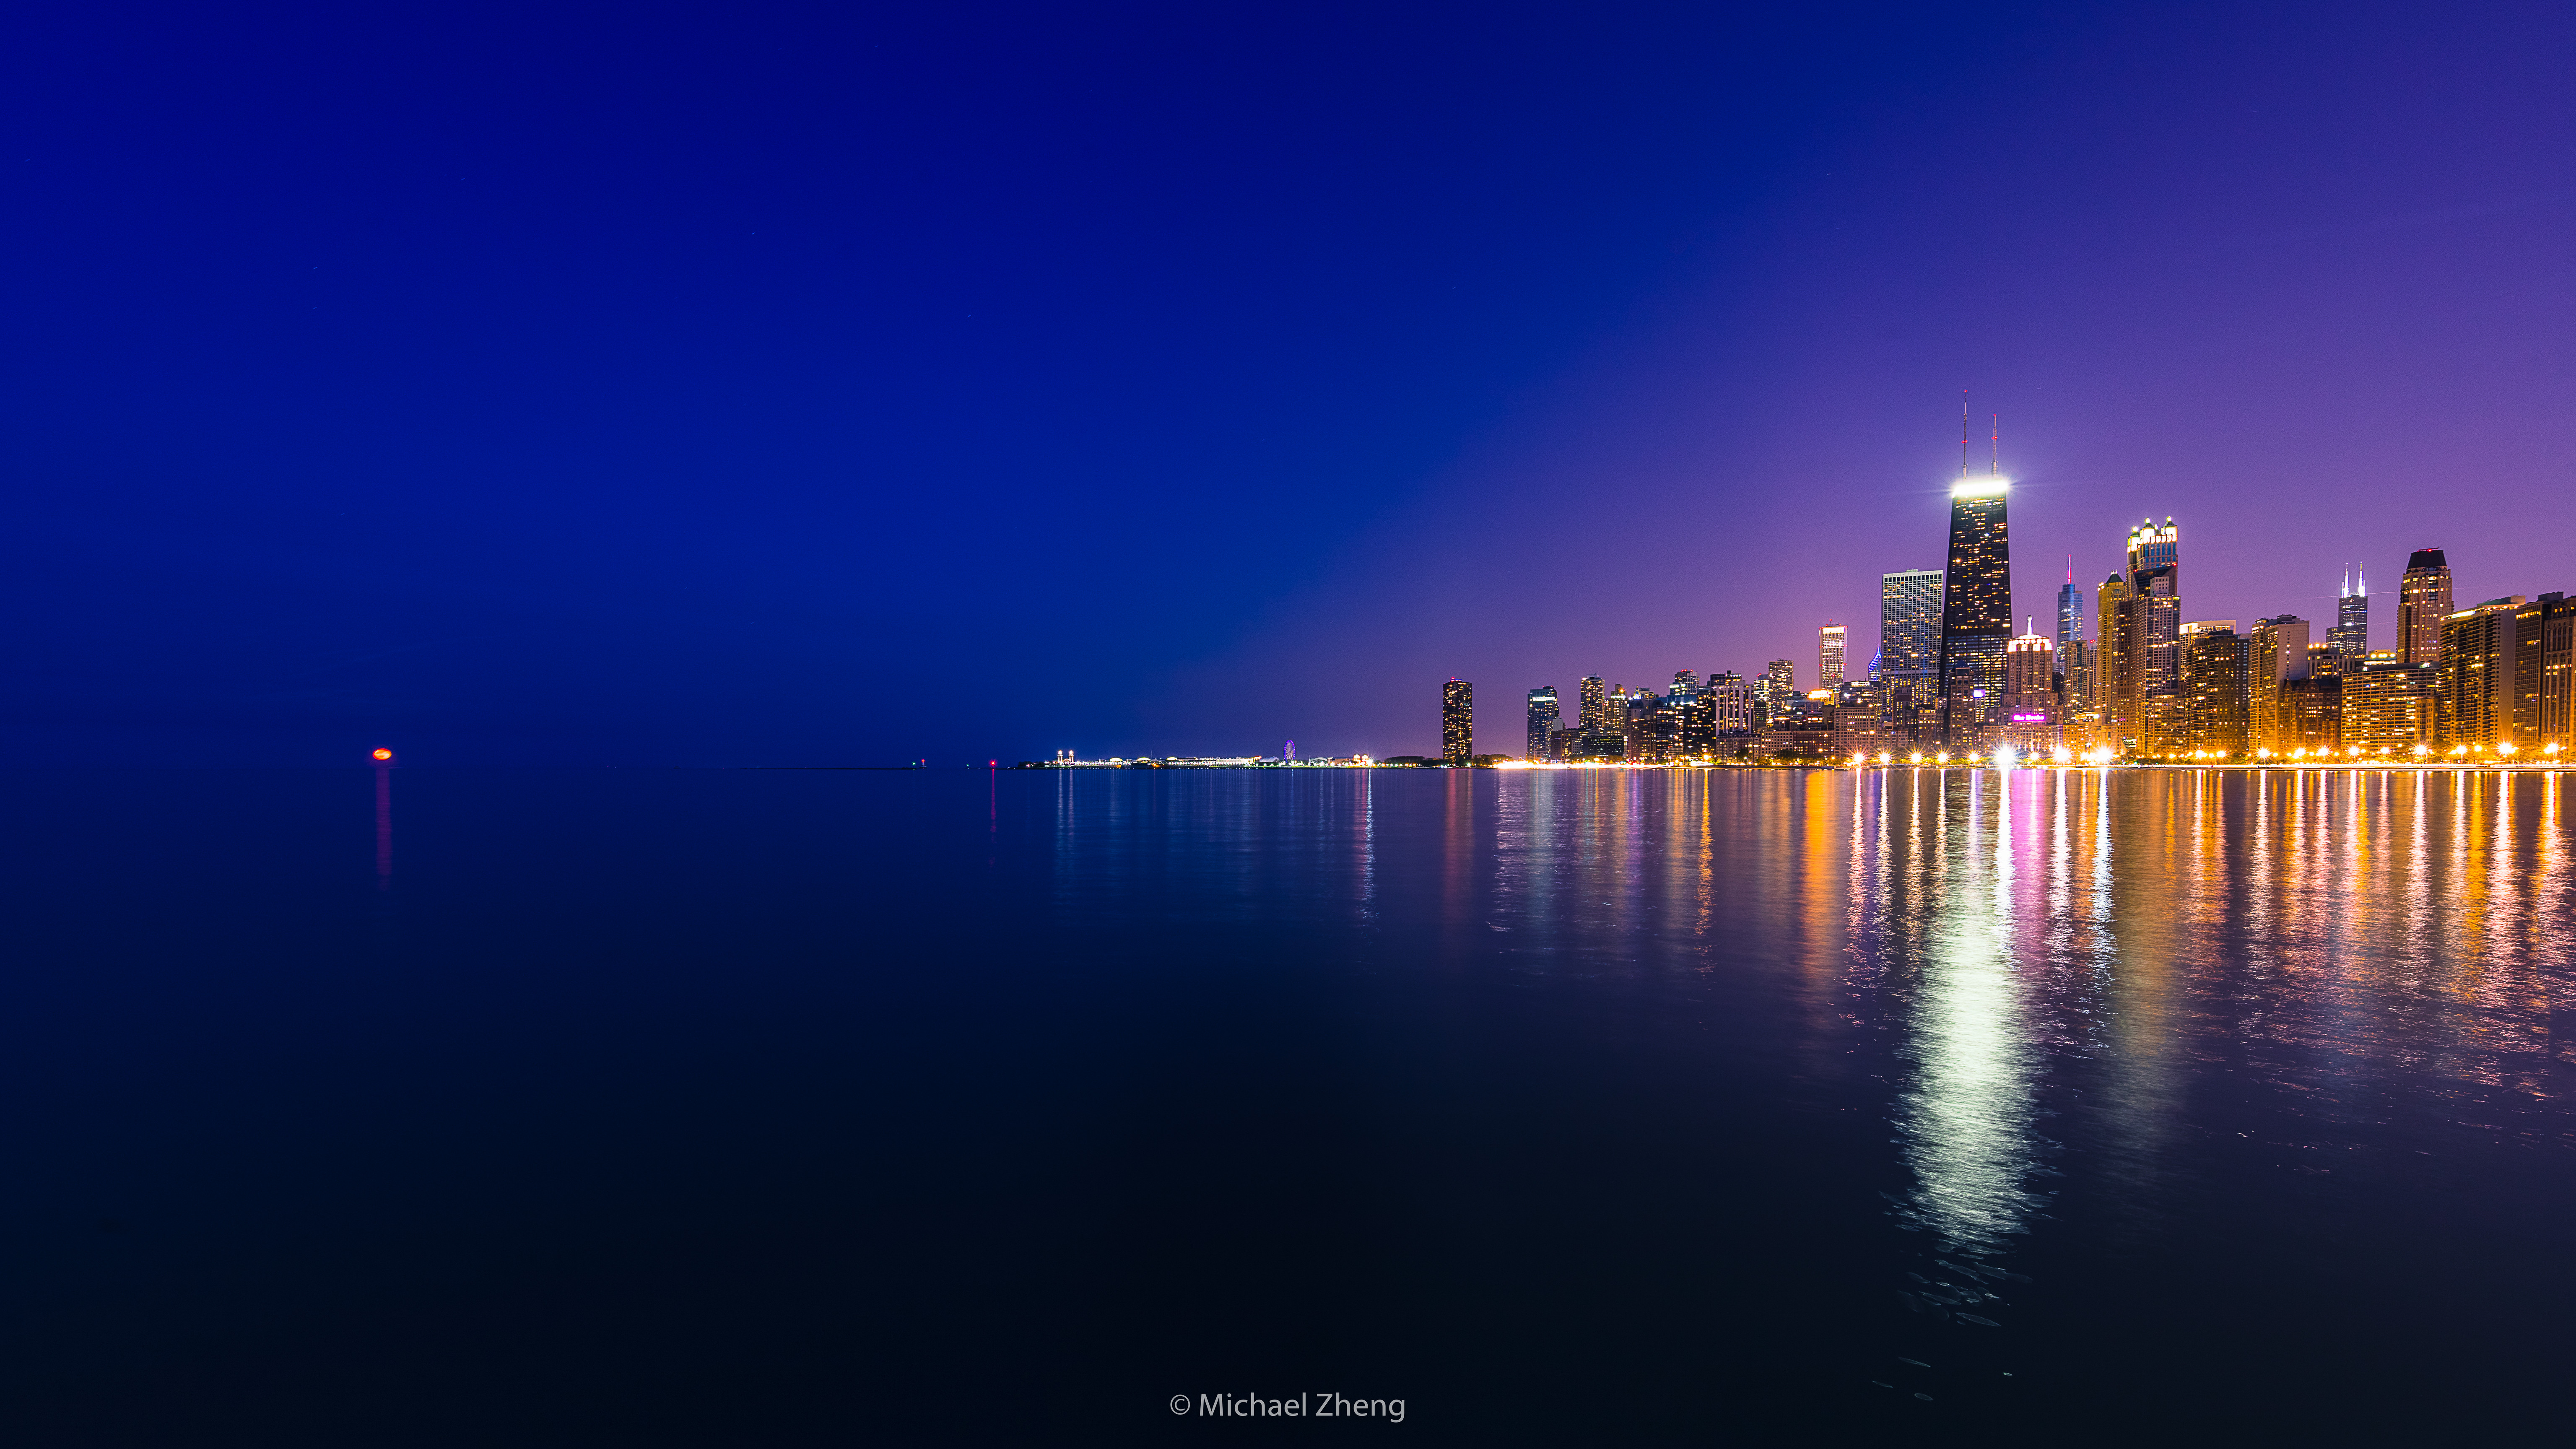 General 6144x3456 Chicago photography landscape city night water reflection city lights